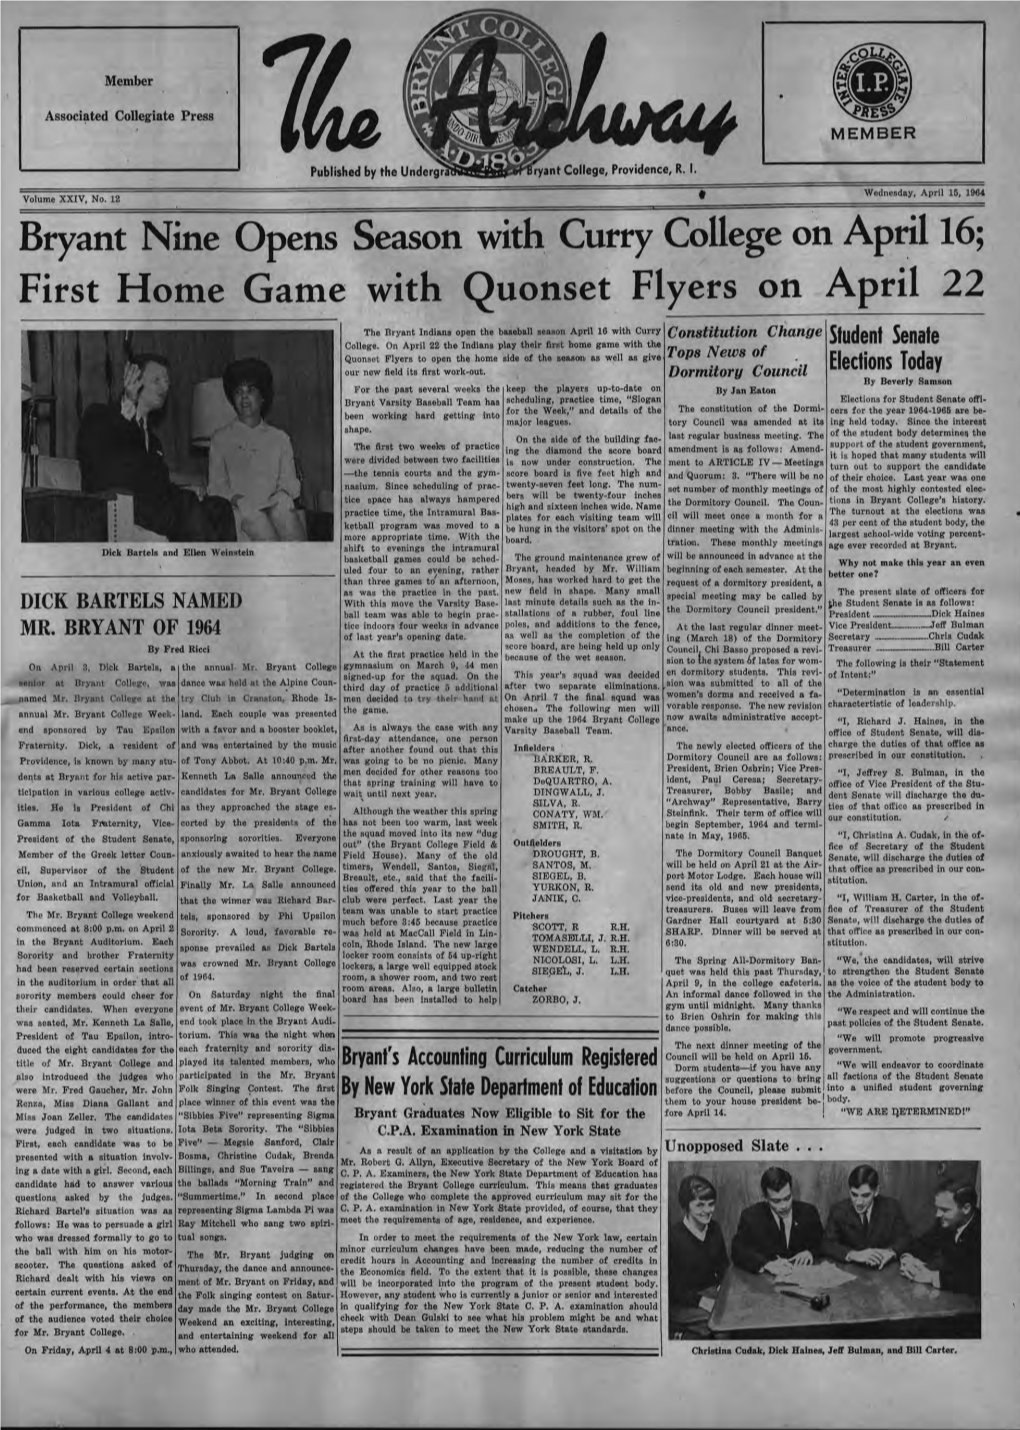 Bryant Nine Opens Season with Curry College on April 16; First Home